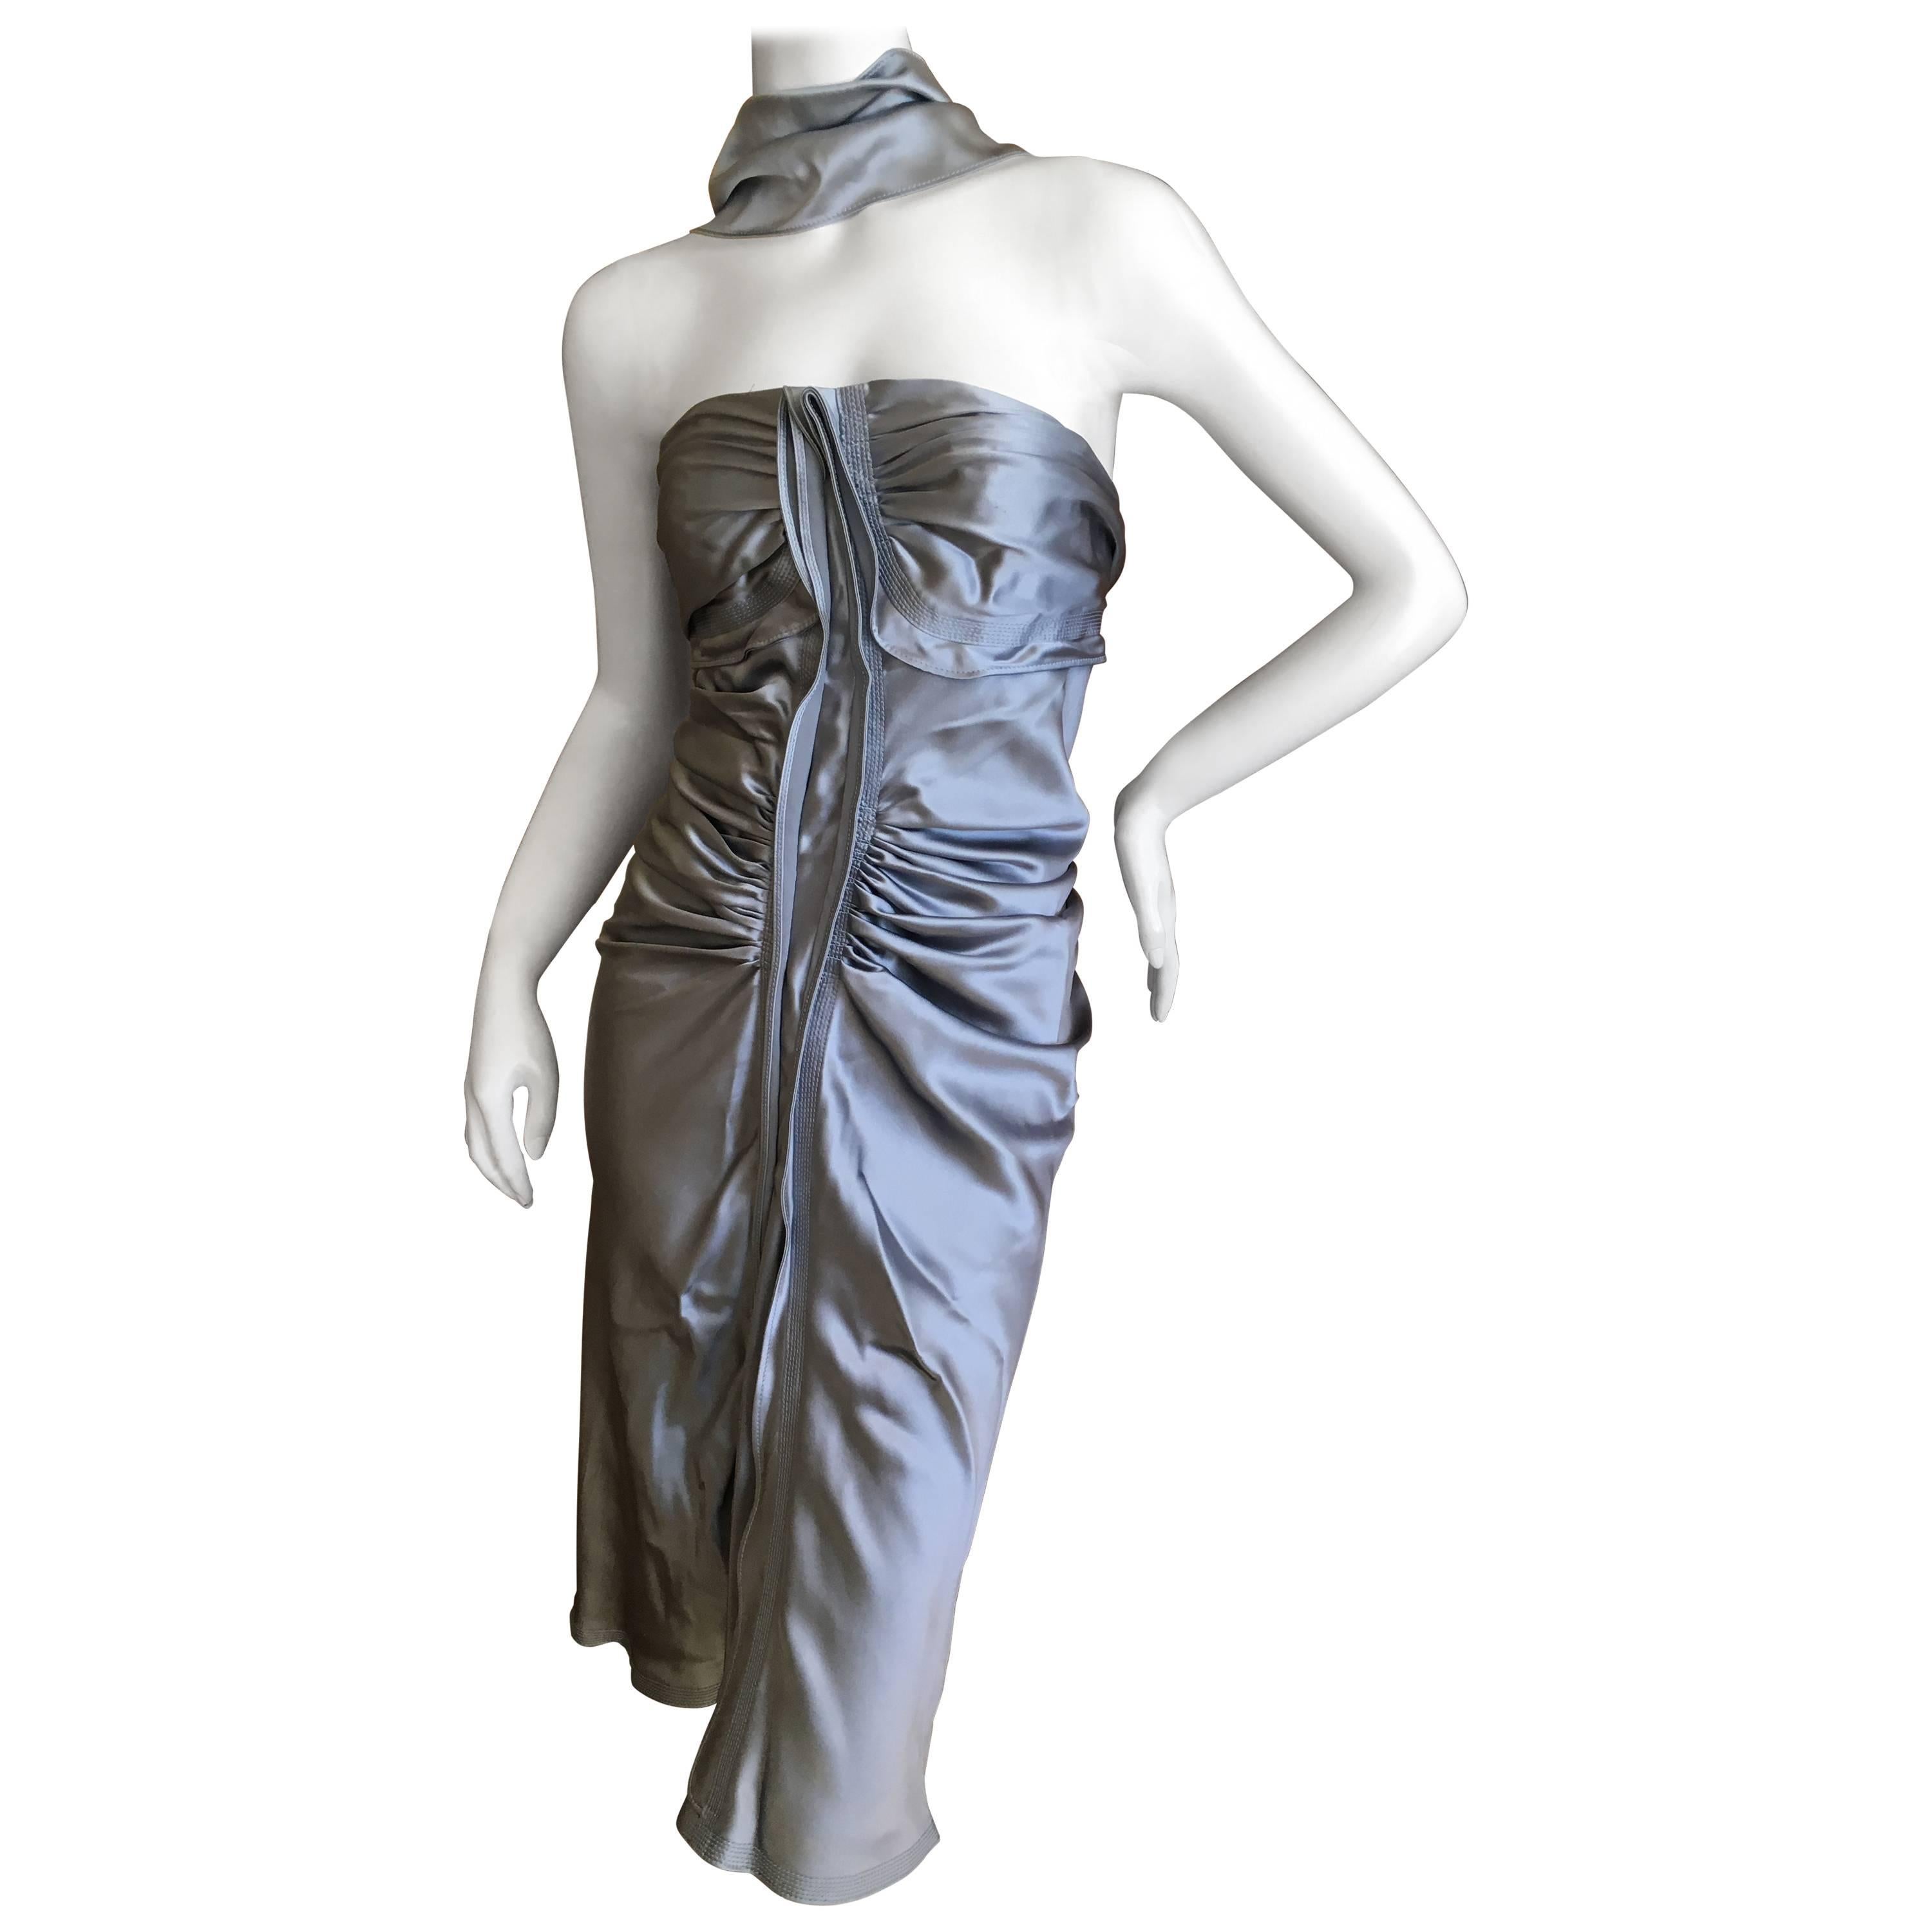 Yves Saint Laurent by Tom Ford Shimmery Silver Silk Dress For Sale